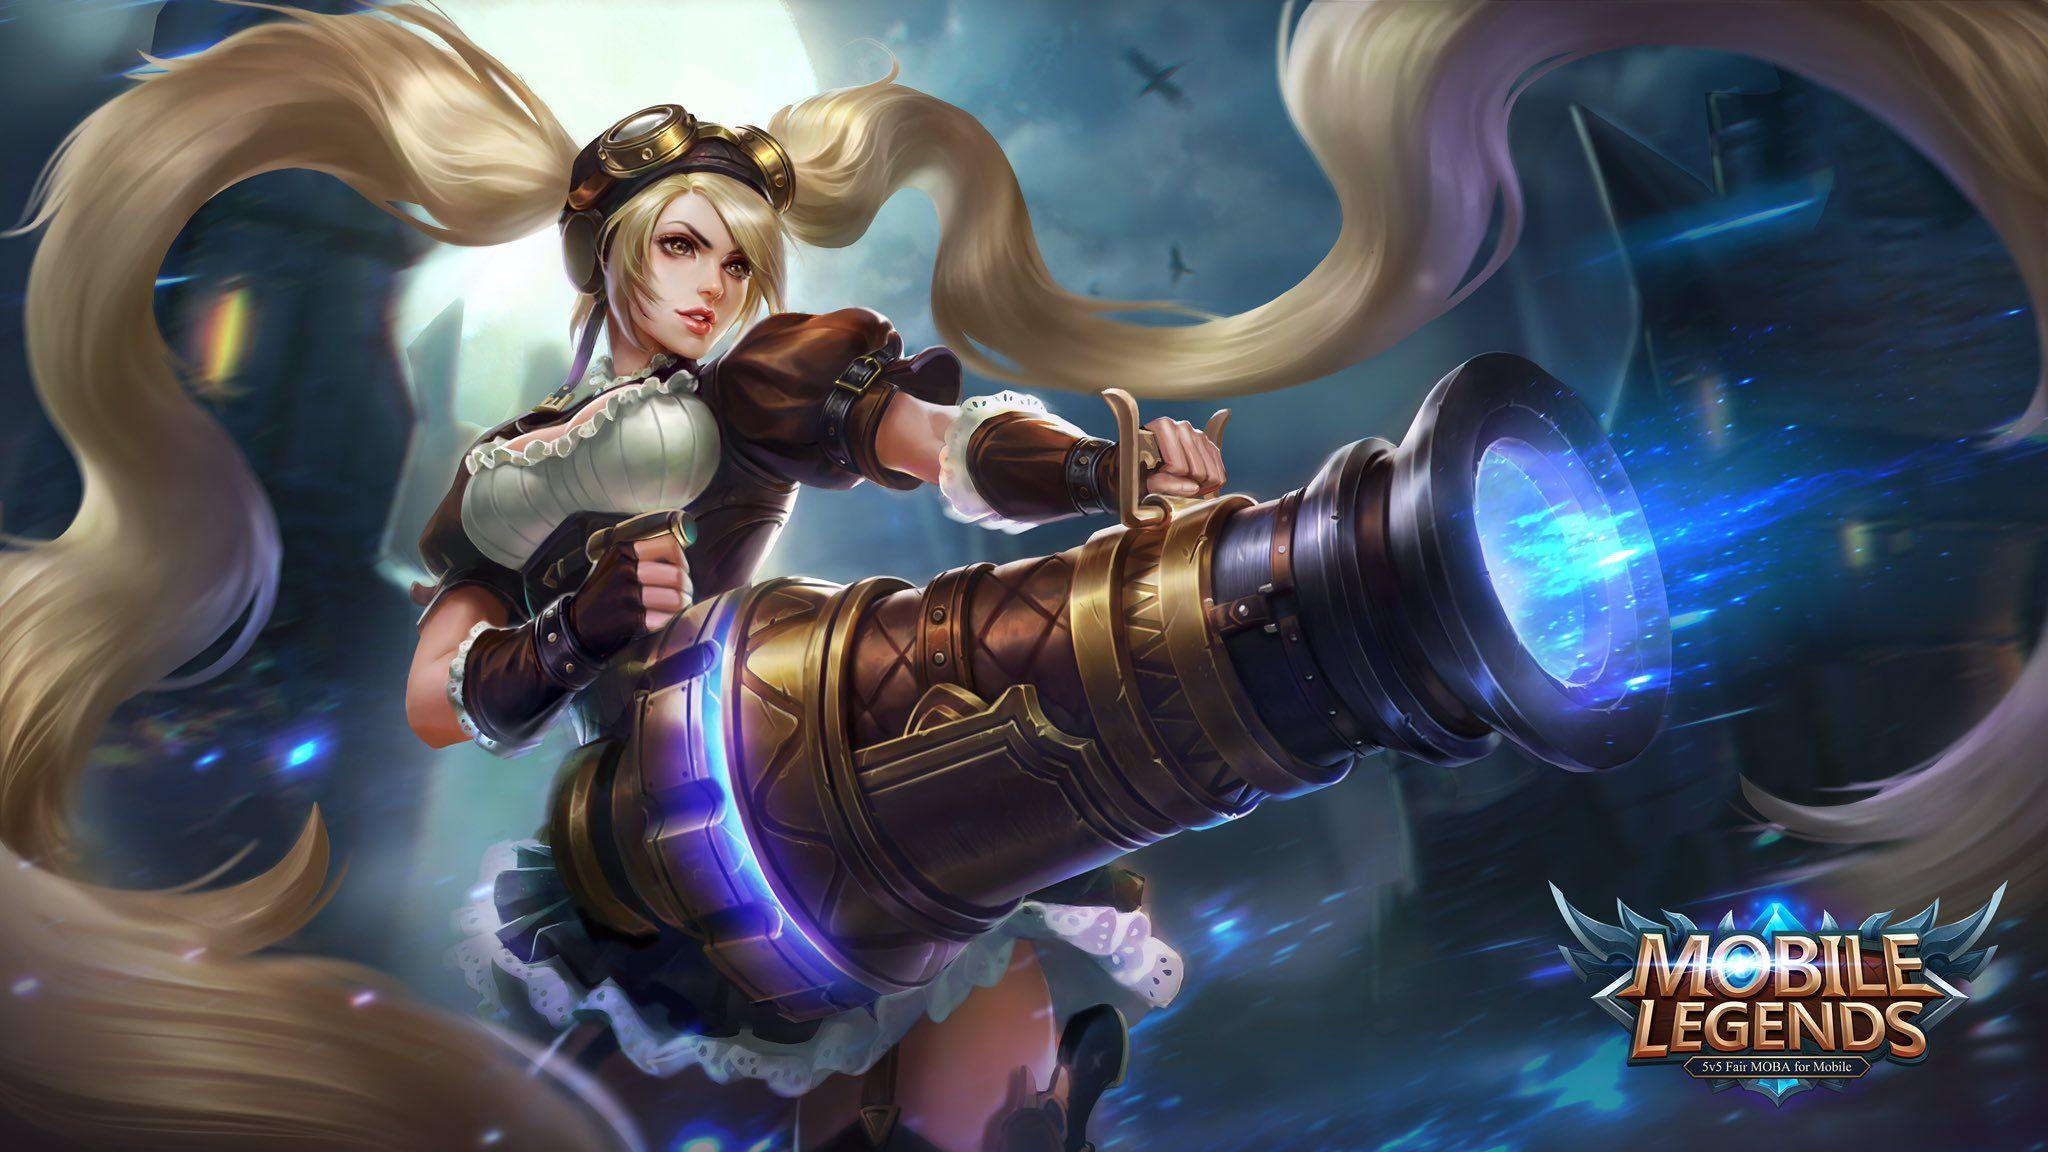 Layla Mobile Legends Wallpapers Full HD